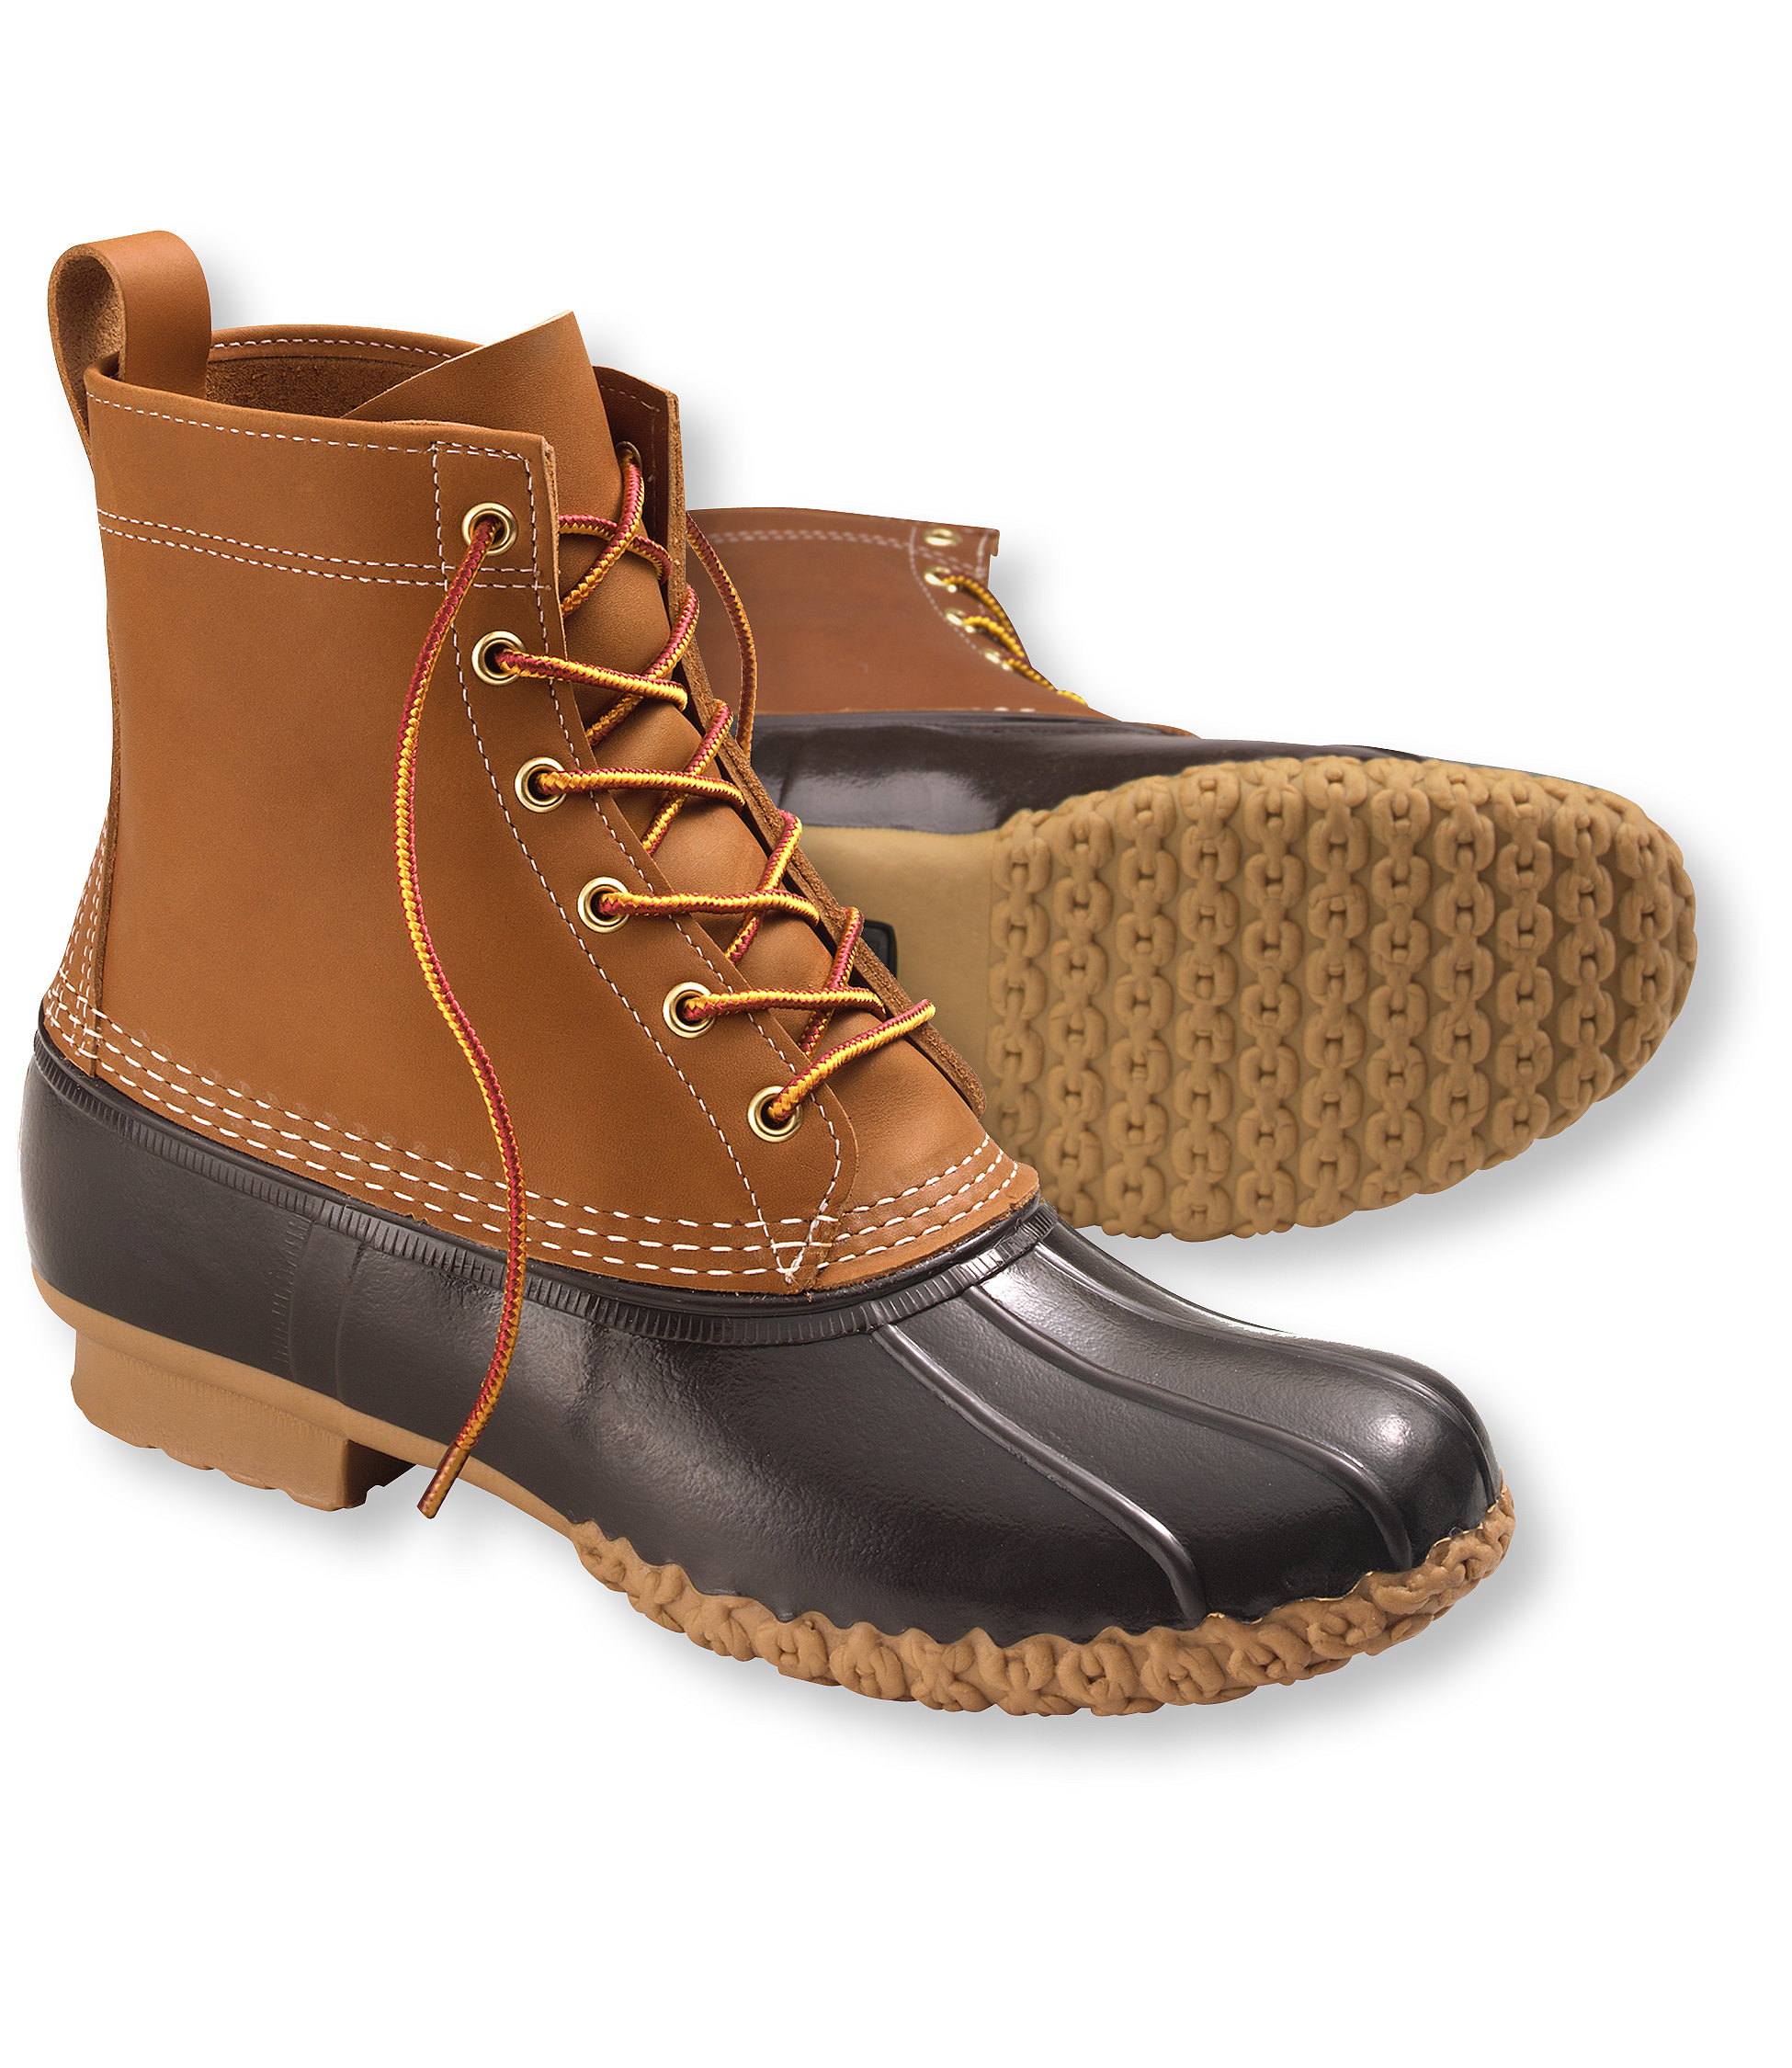 Women's Winter Boots Made in USA